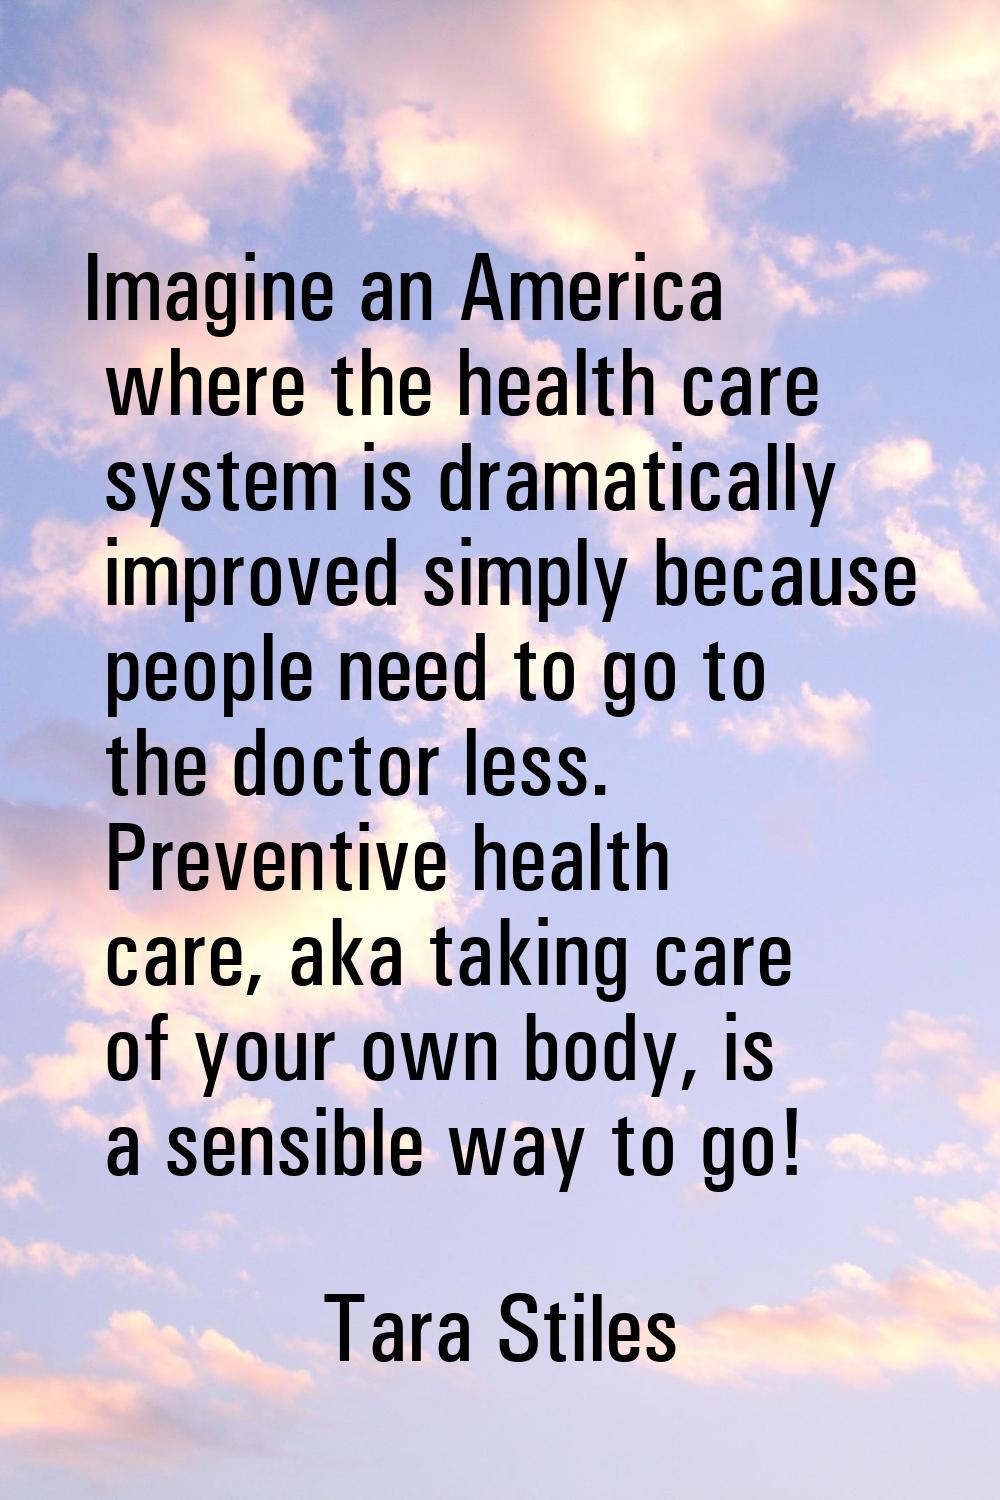 Imagine an America where the health care system is dramatically improved simply because people need